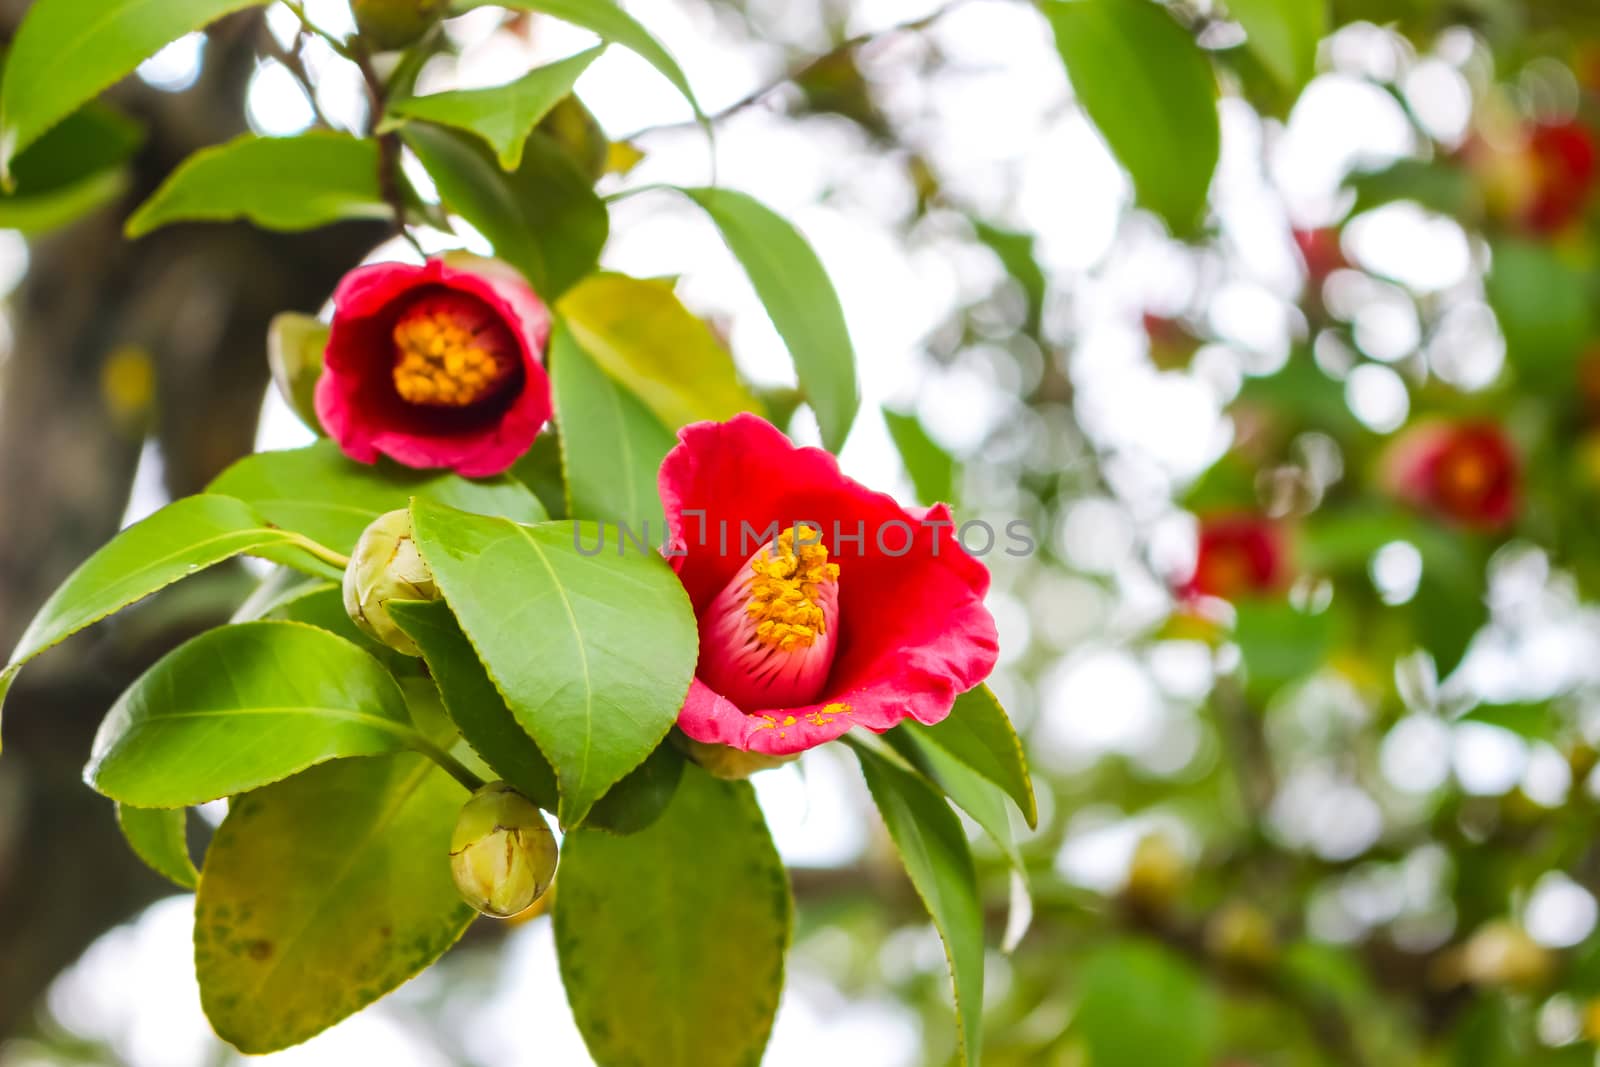 Red Japanese camellia flowers blooming in the garden